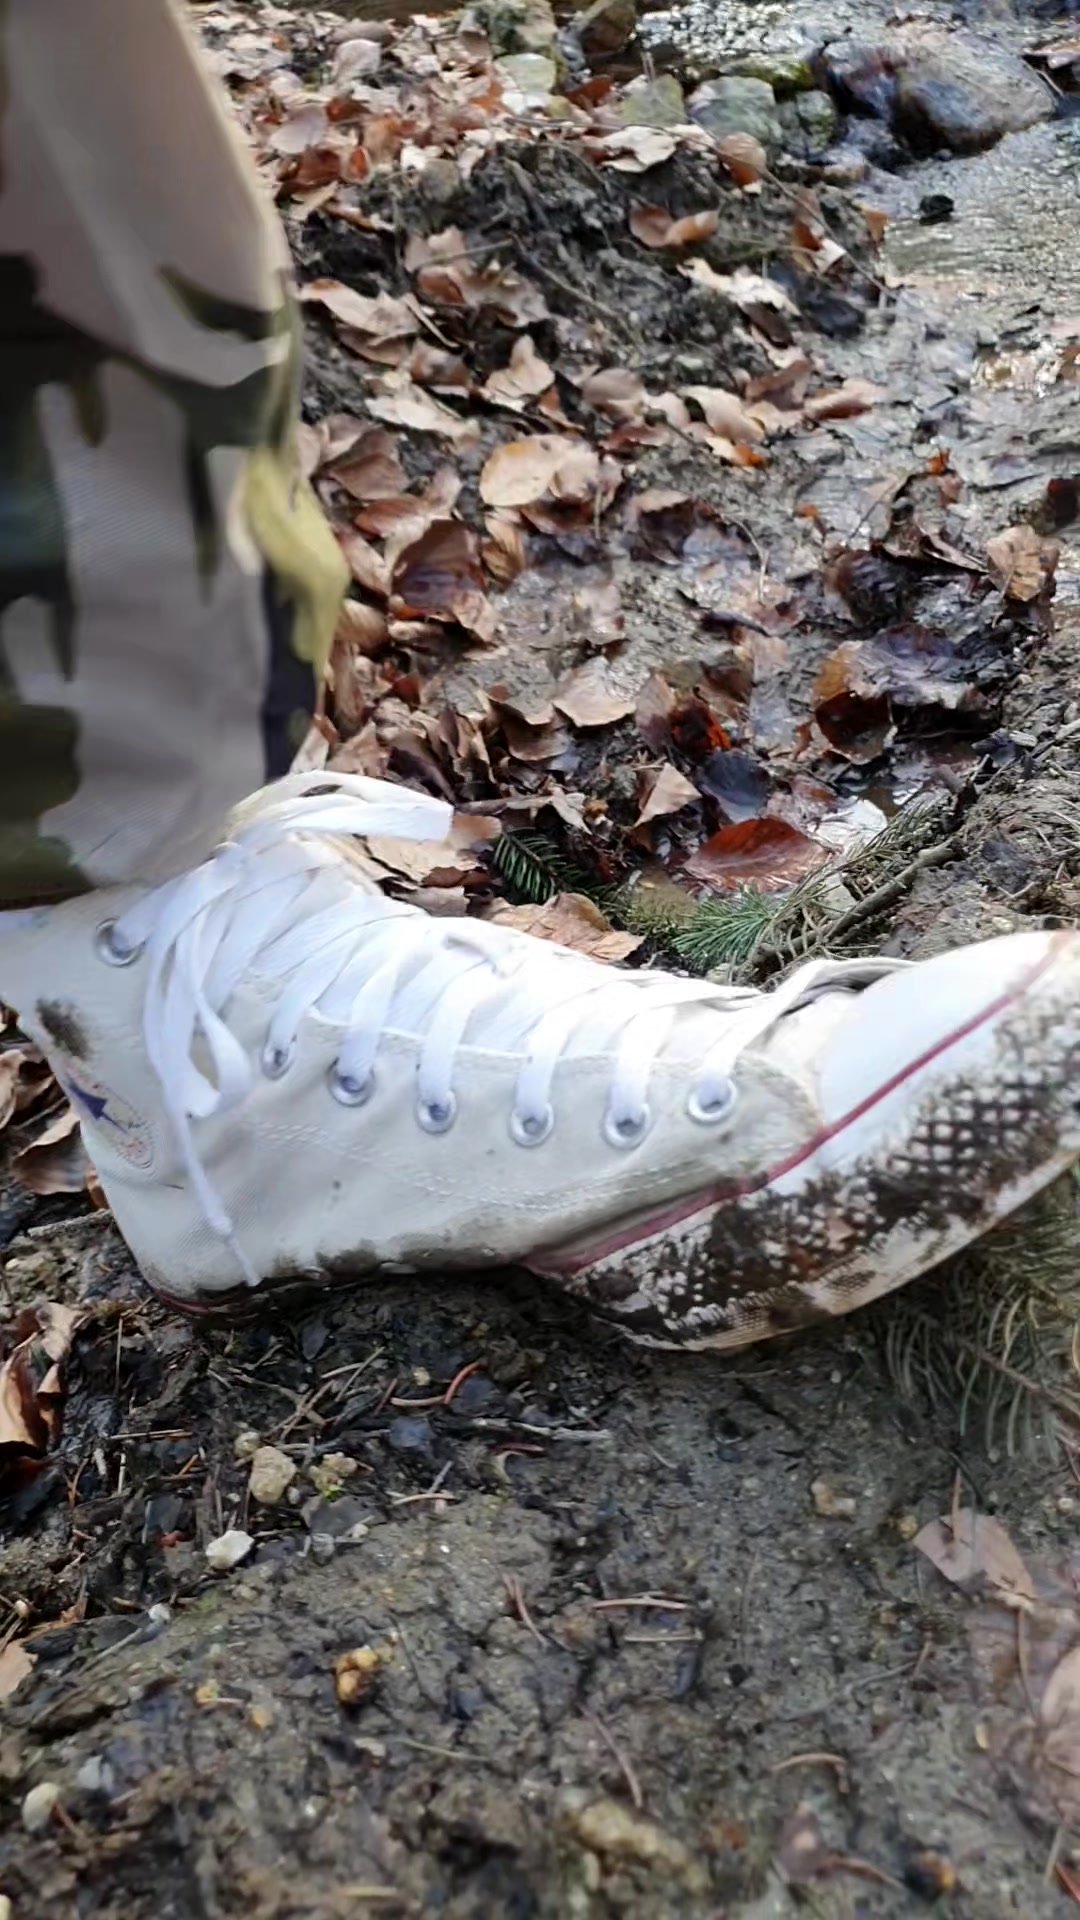 Muddy hike in white Converse with pissing